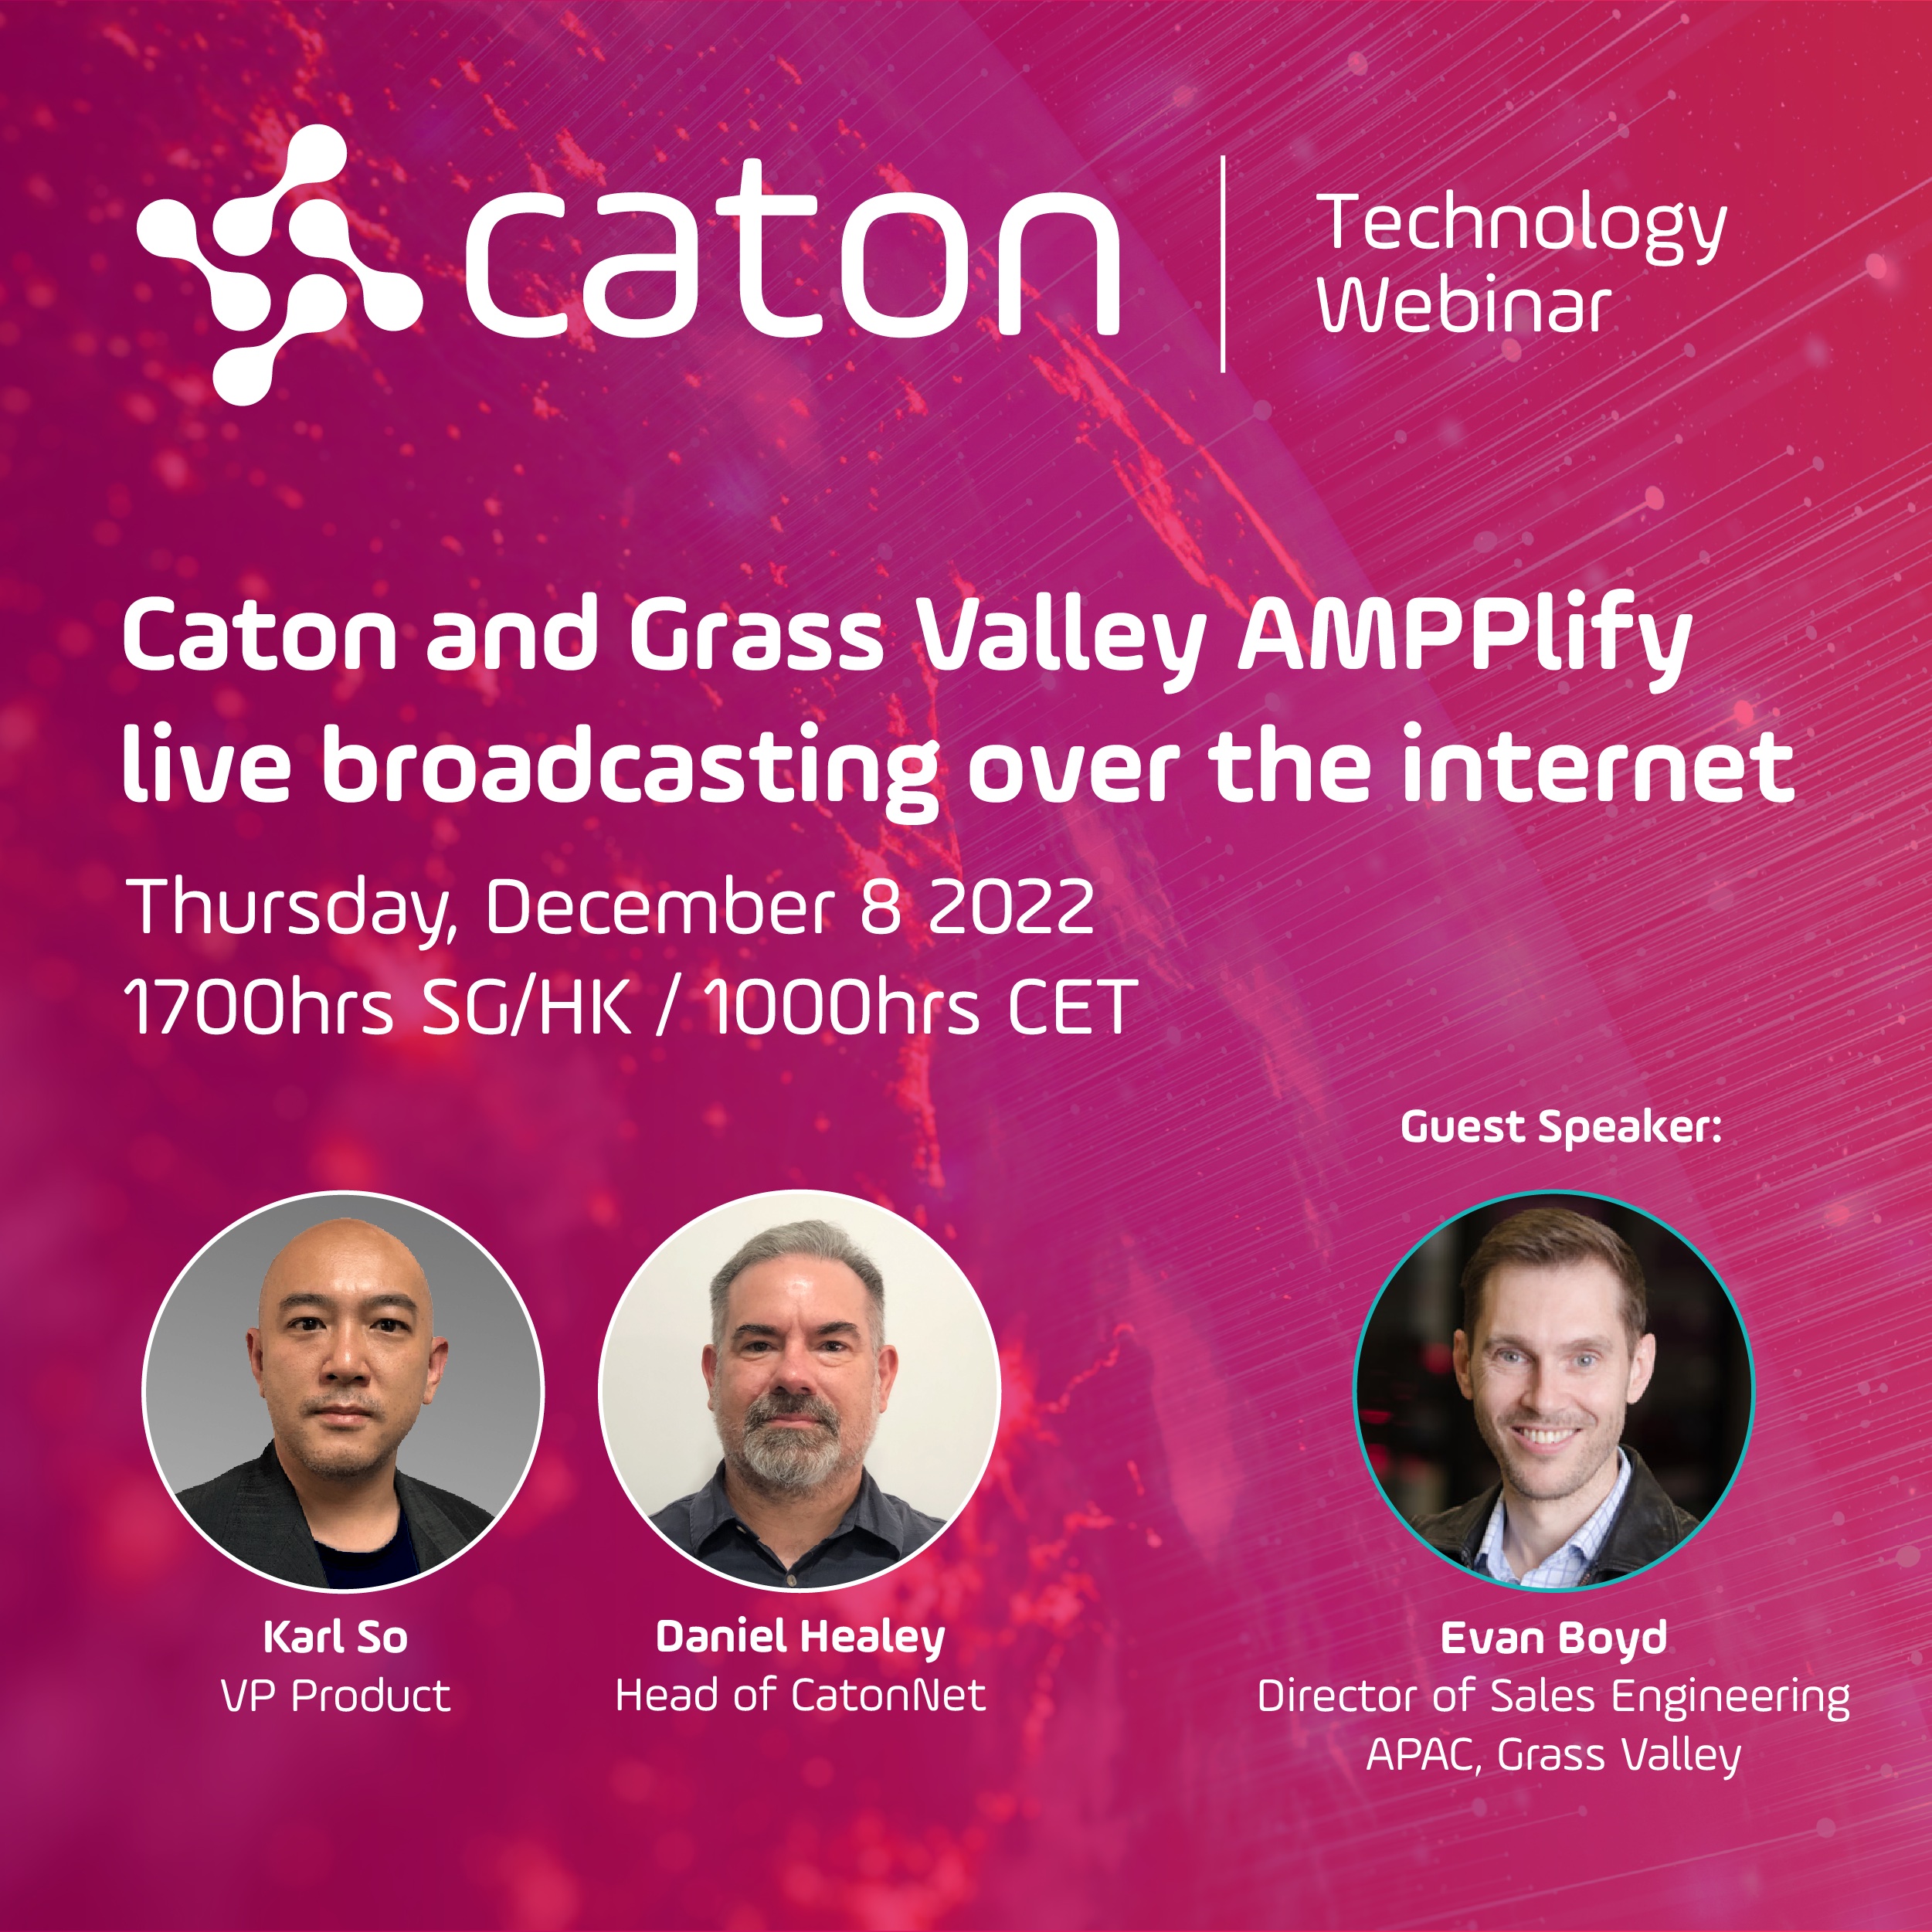 Caton Webinar - Caton and Grass Valley AMMPlify live broadcasting over the internet